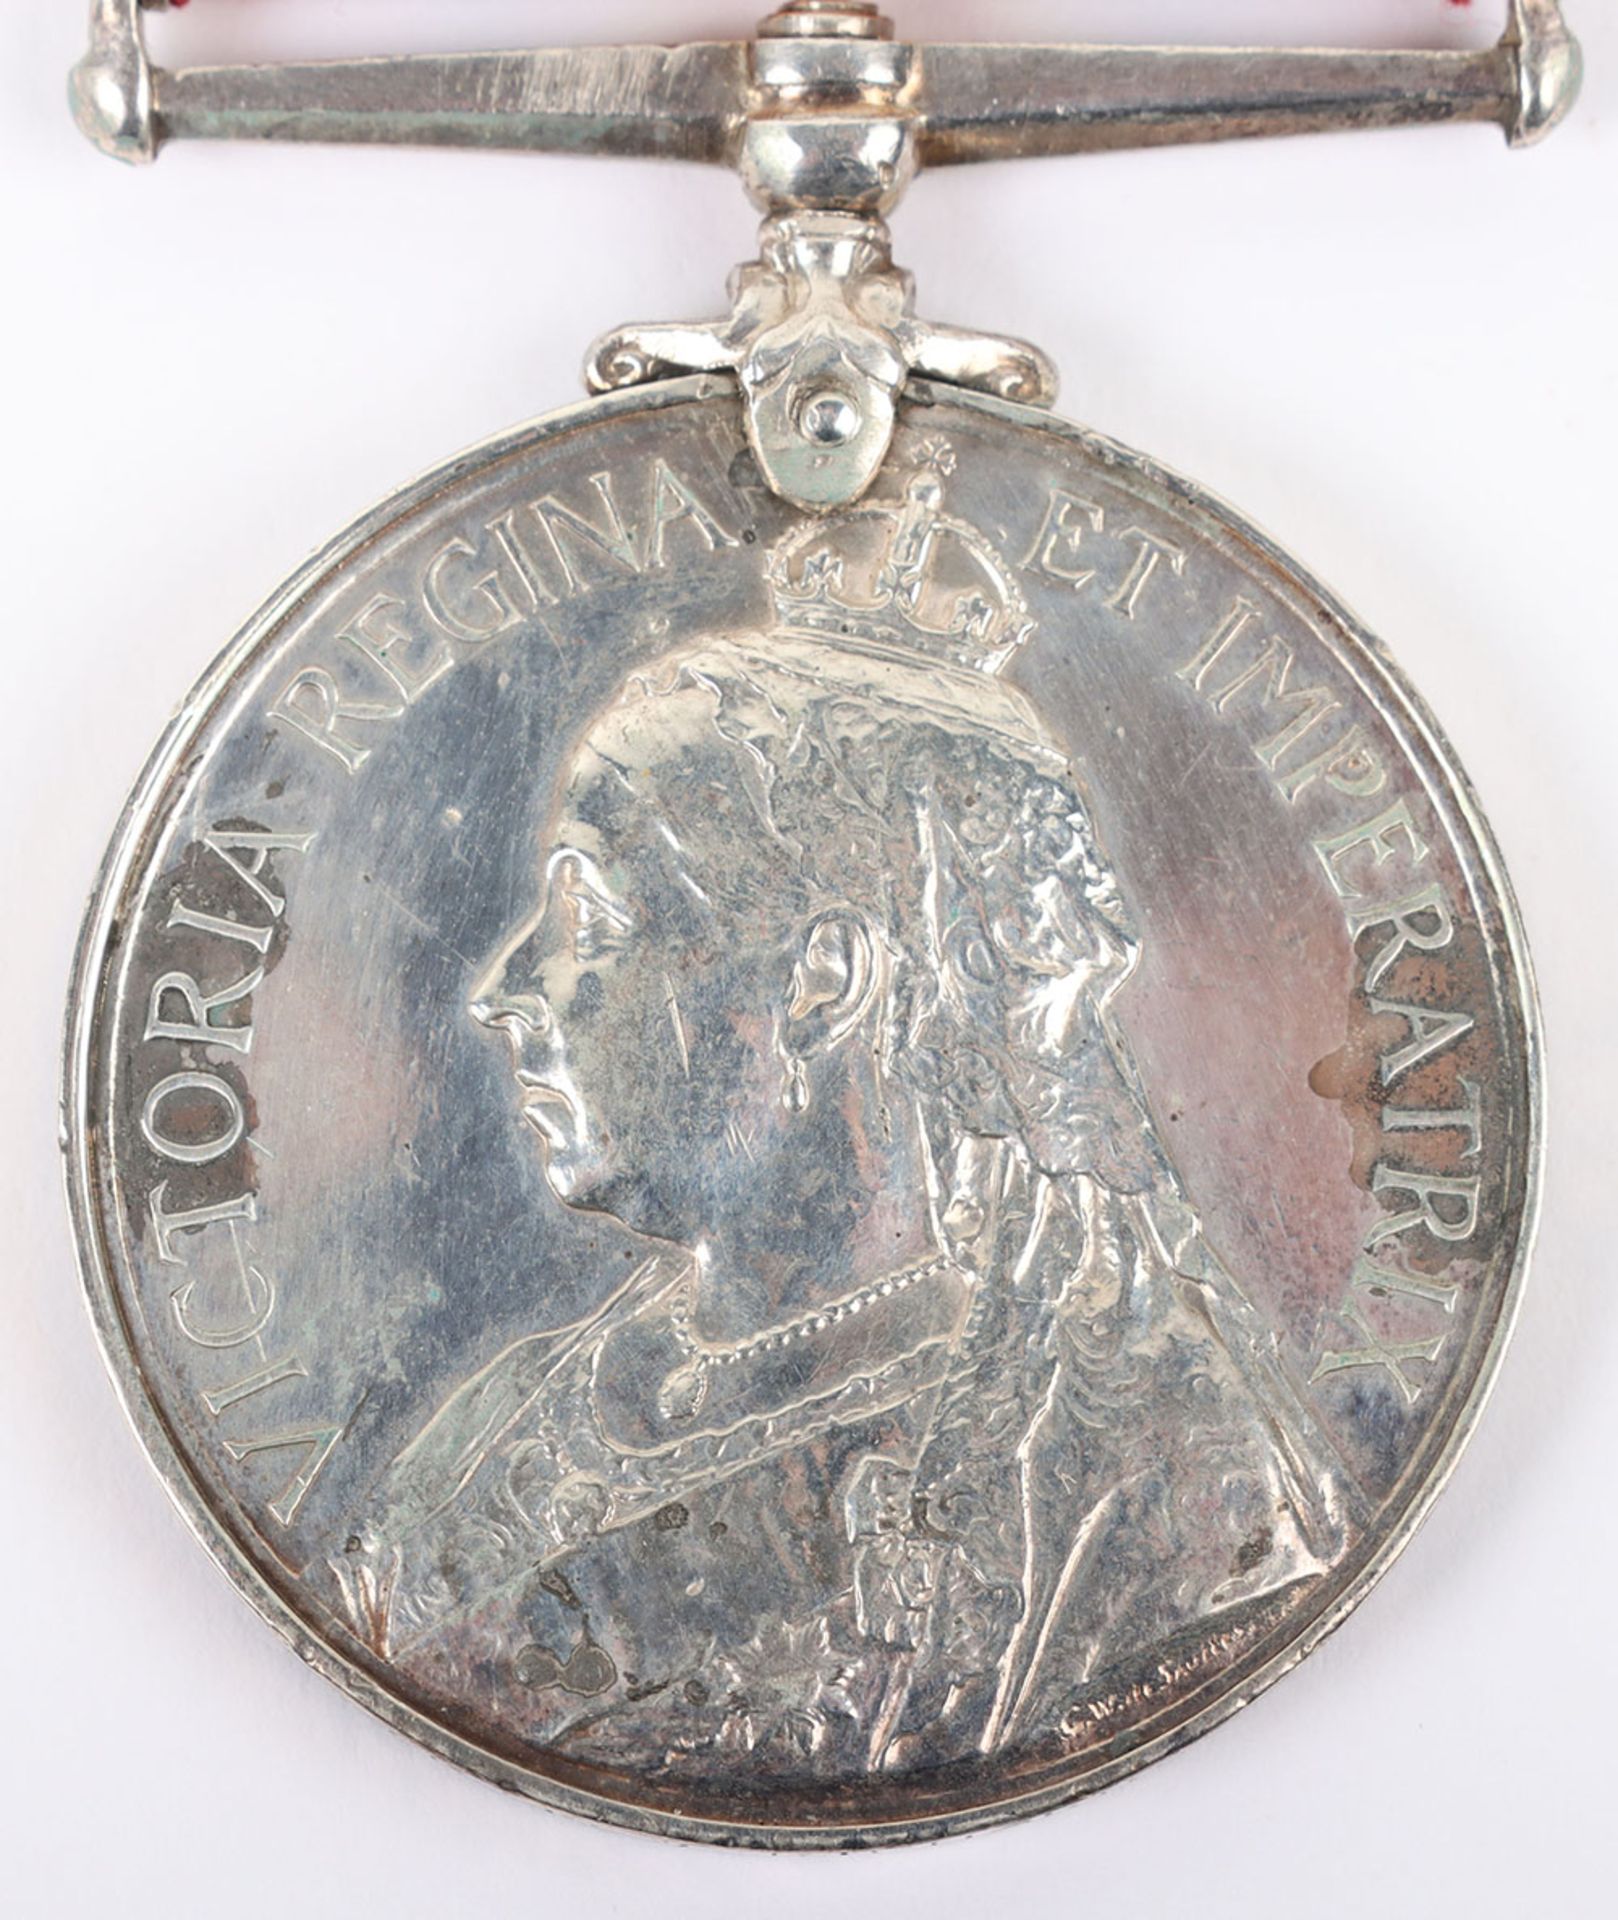 Queens South Africa Medal 4th Battalion the Durham Light Infantry - Image 3 of 7